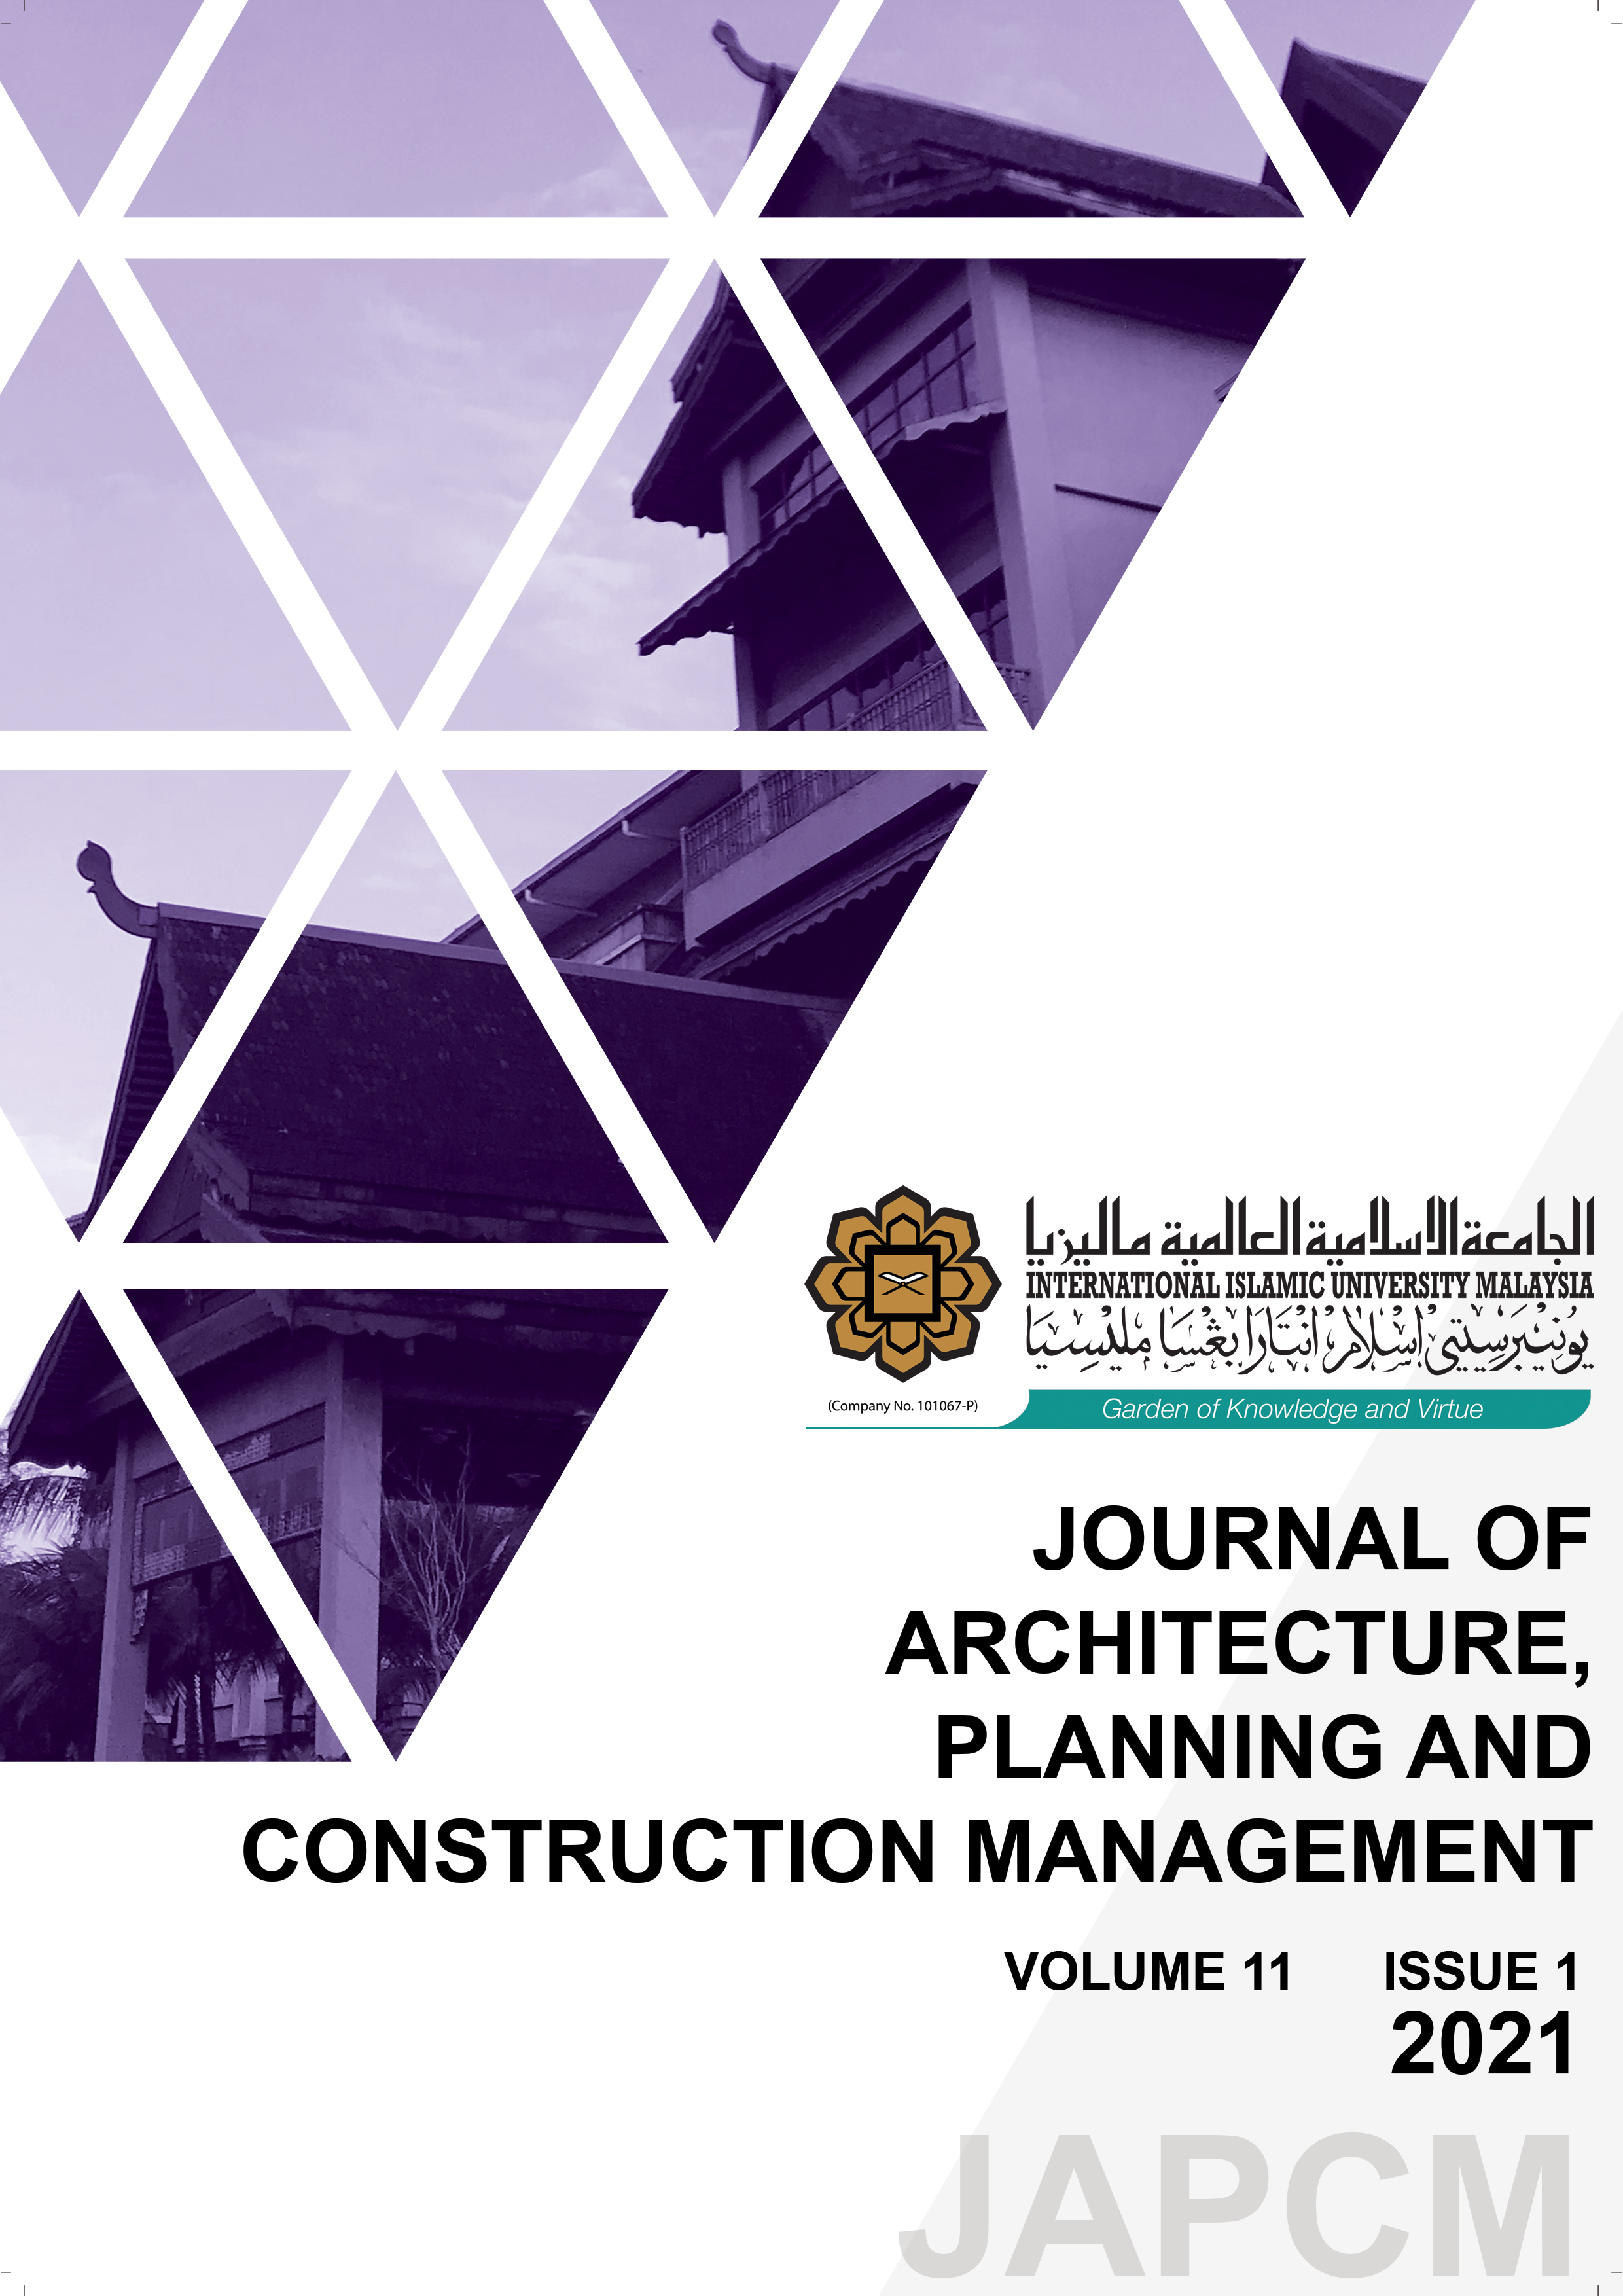 					View Vol. 11 No. 1 (2021): Journal of Architecture, Planning and Construction Management
				